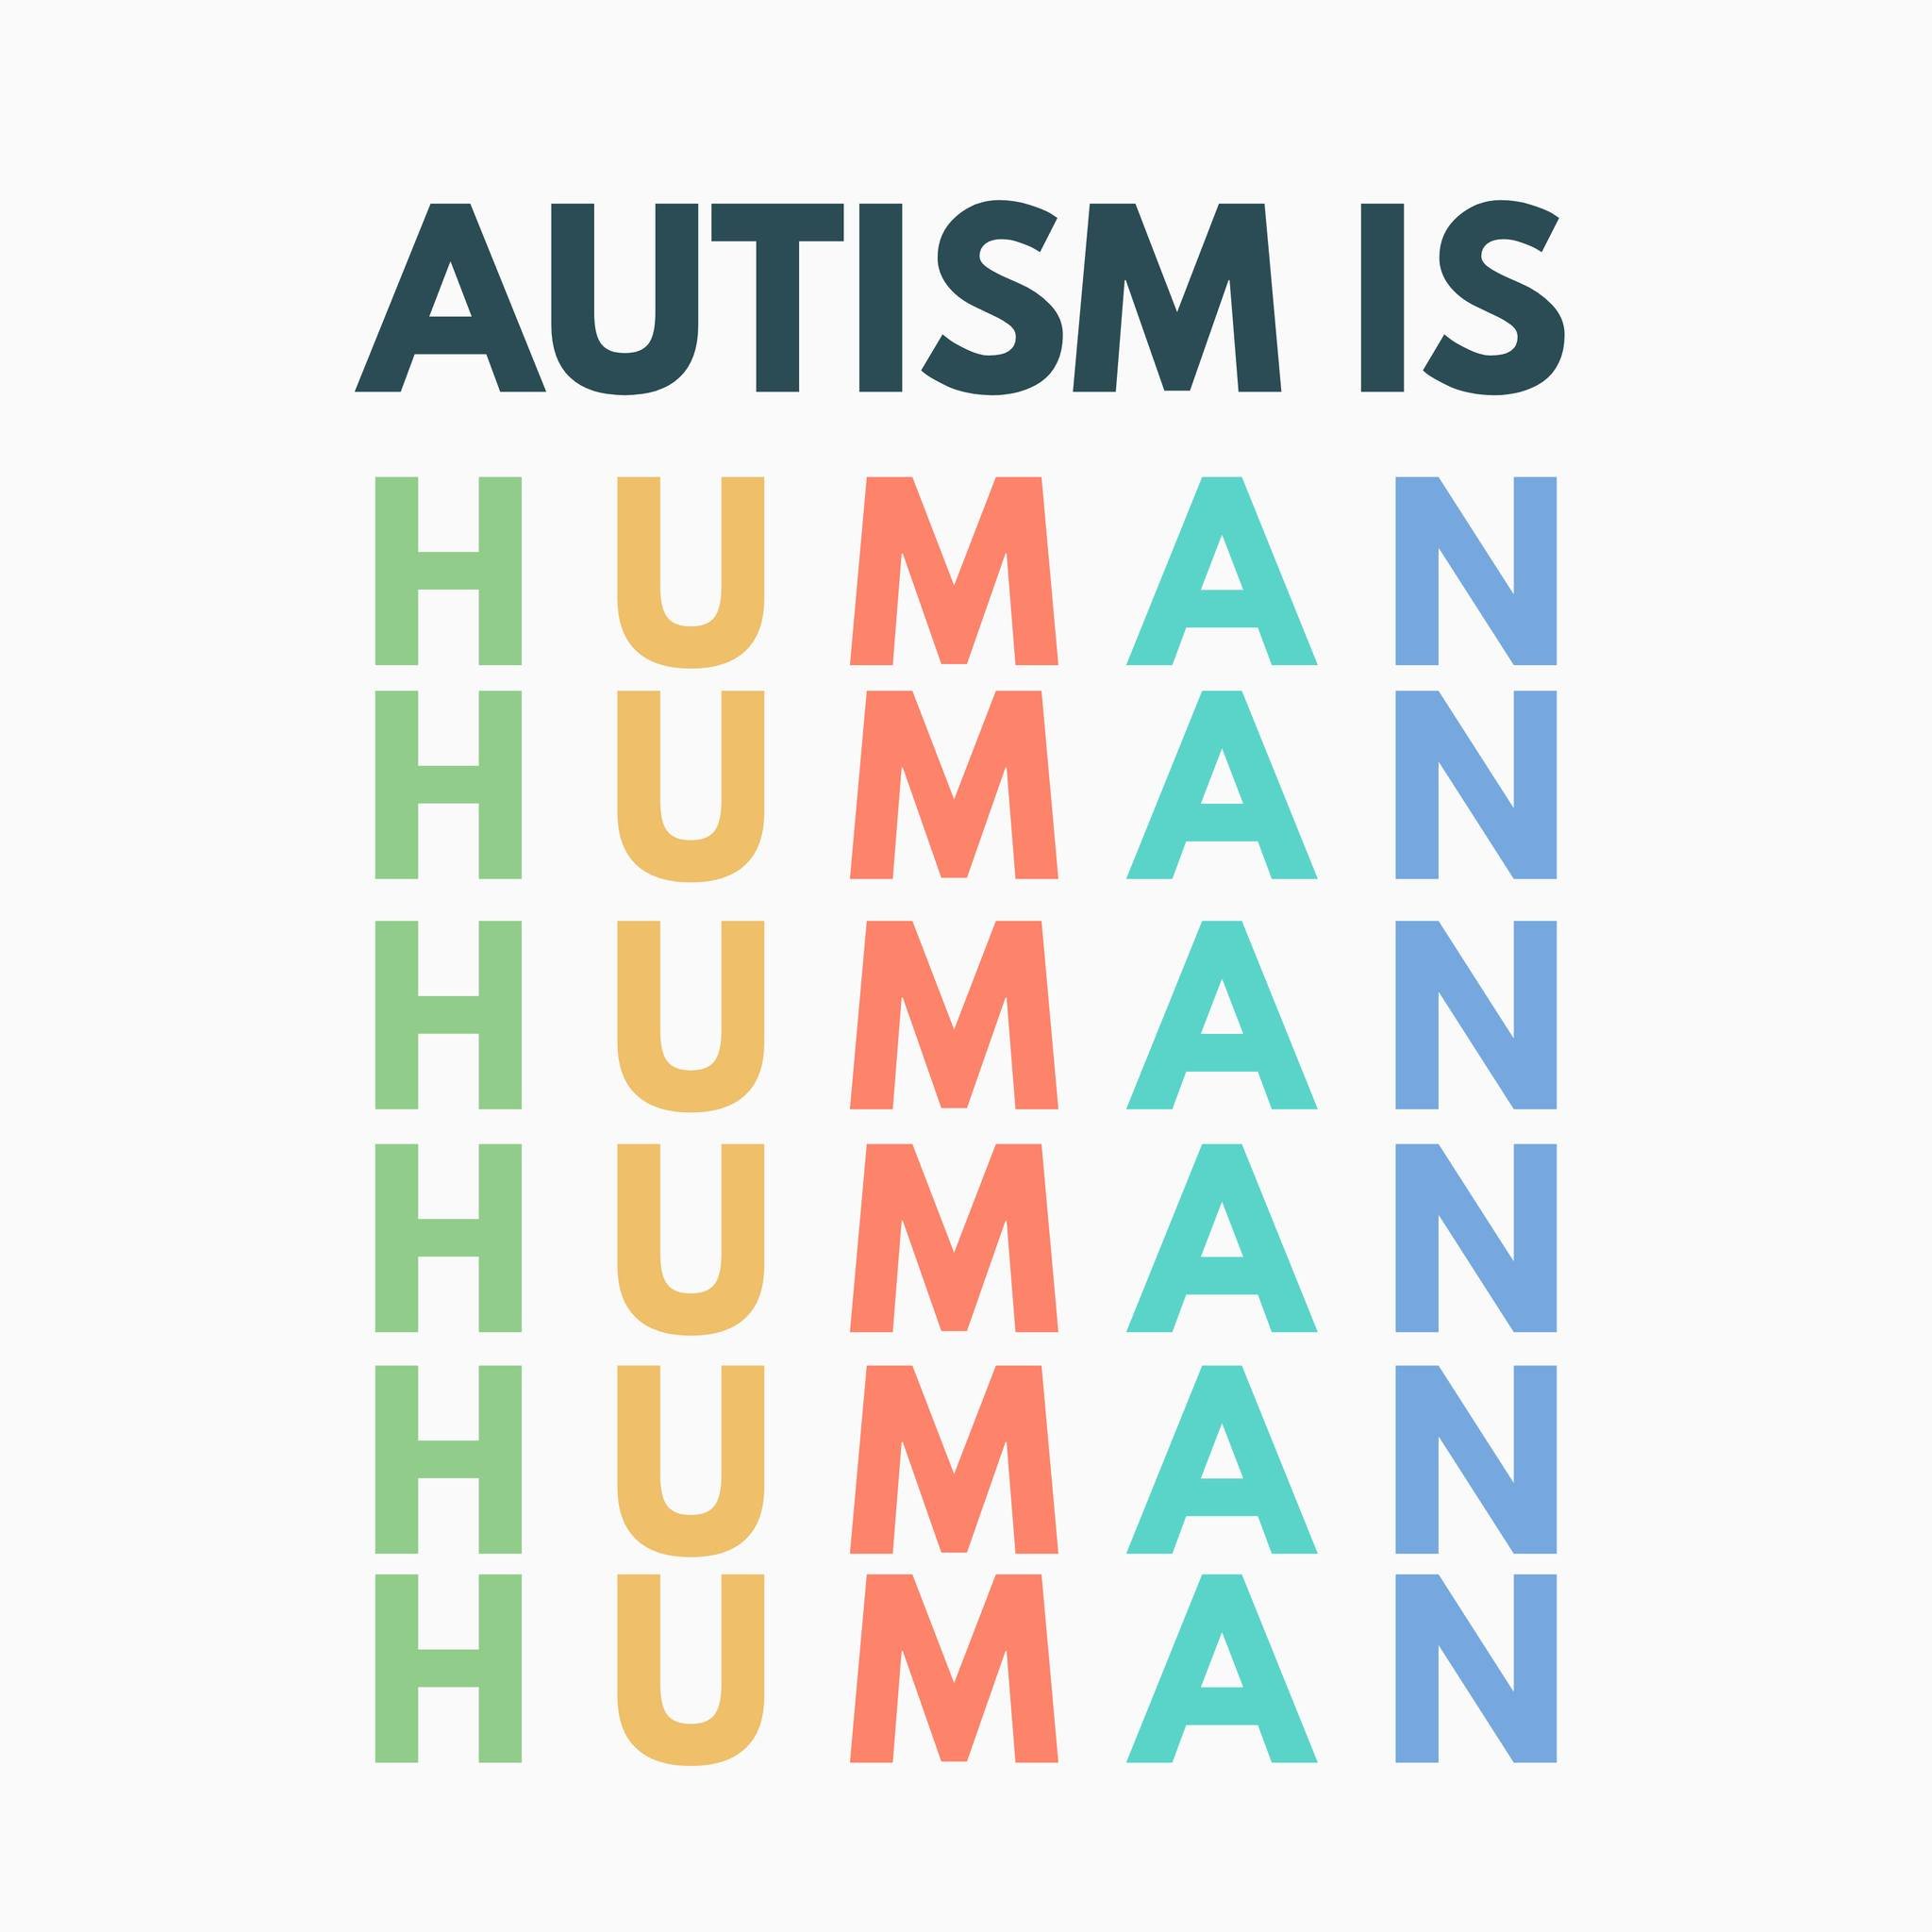 Let's work together to rewrite the narrative. By continuing to learn, listen, and share experiences, we pave the way for true acceptance and inclusion of people of all abilities. Remember, at the heart of it all, autism is just a way of being human. 